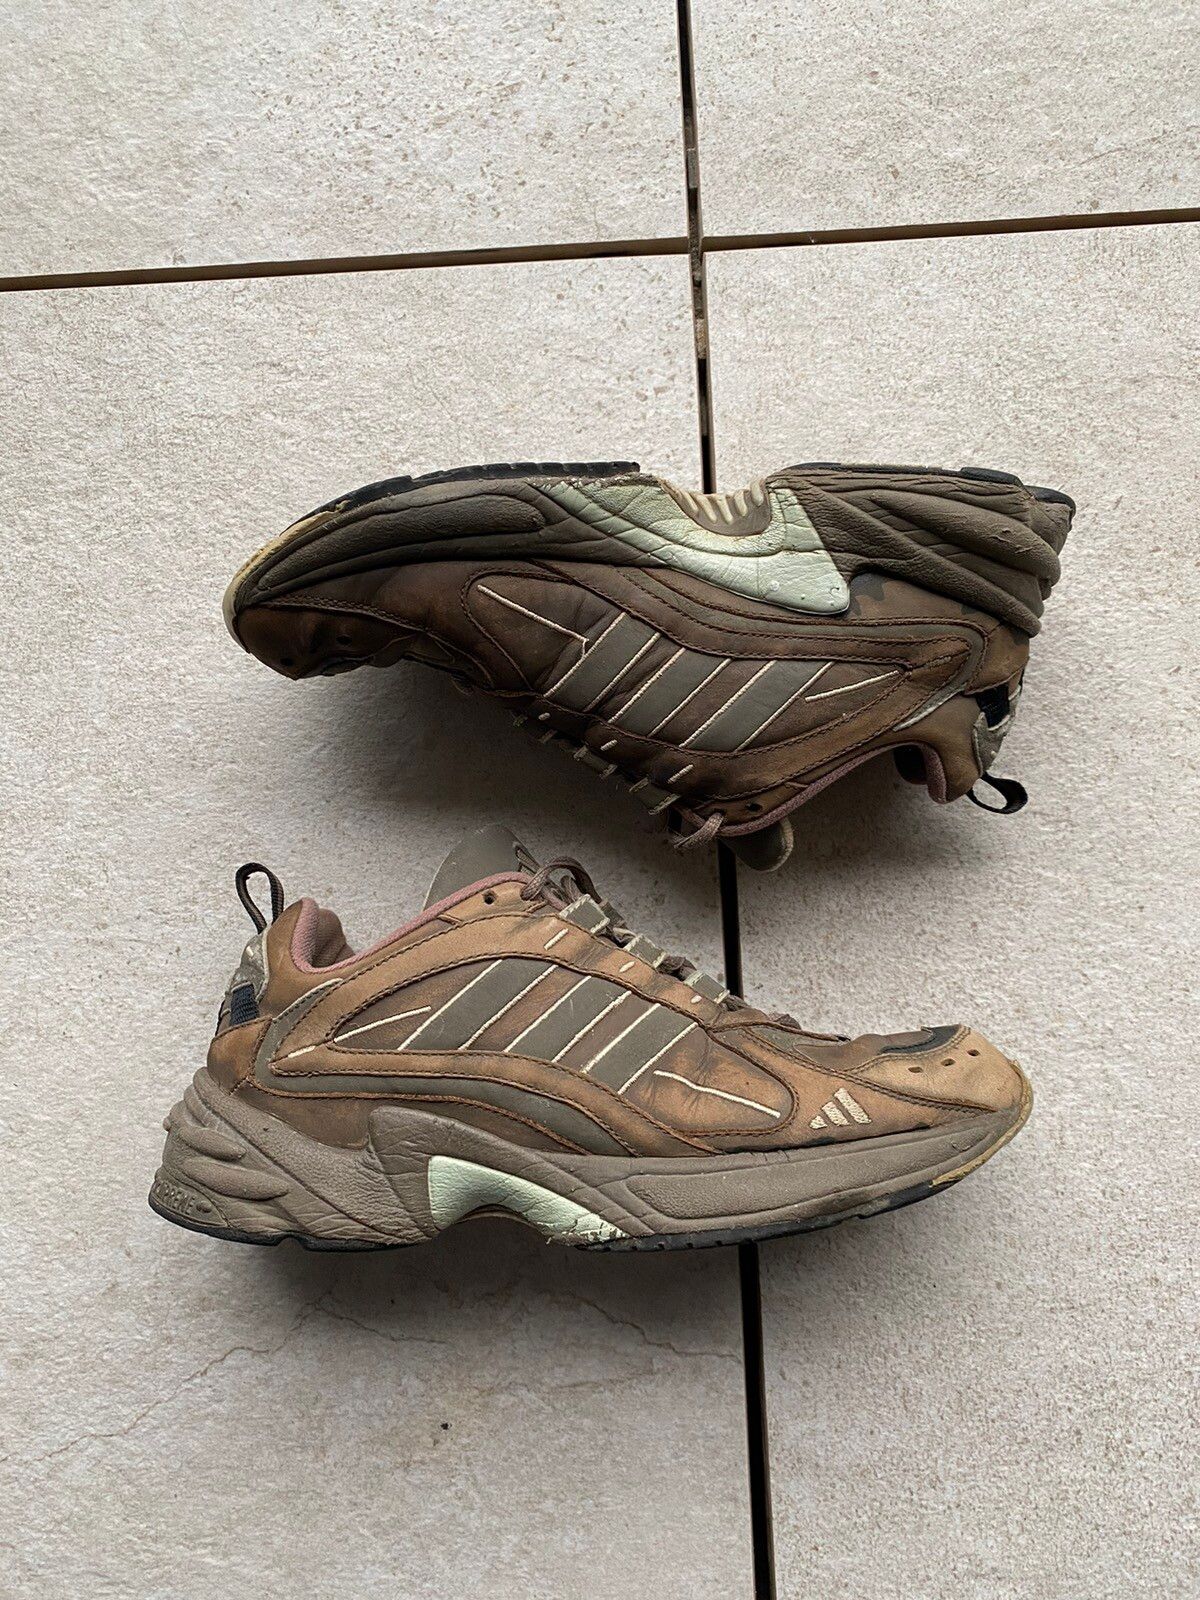 Adidas 90s Vintage Archival Sample Adidas Torsion Brown sneakers 99 Size US 7 / IT 37 - 1 Preview